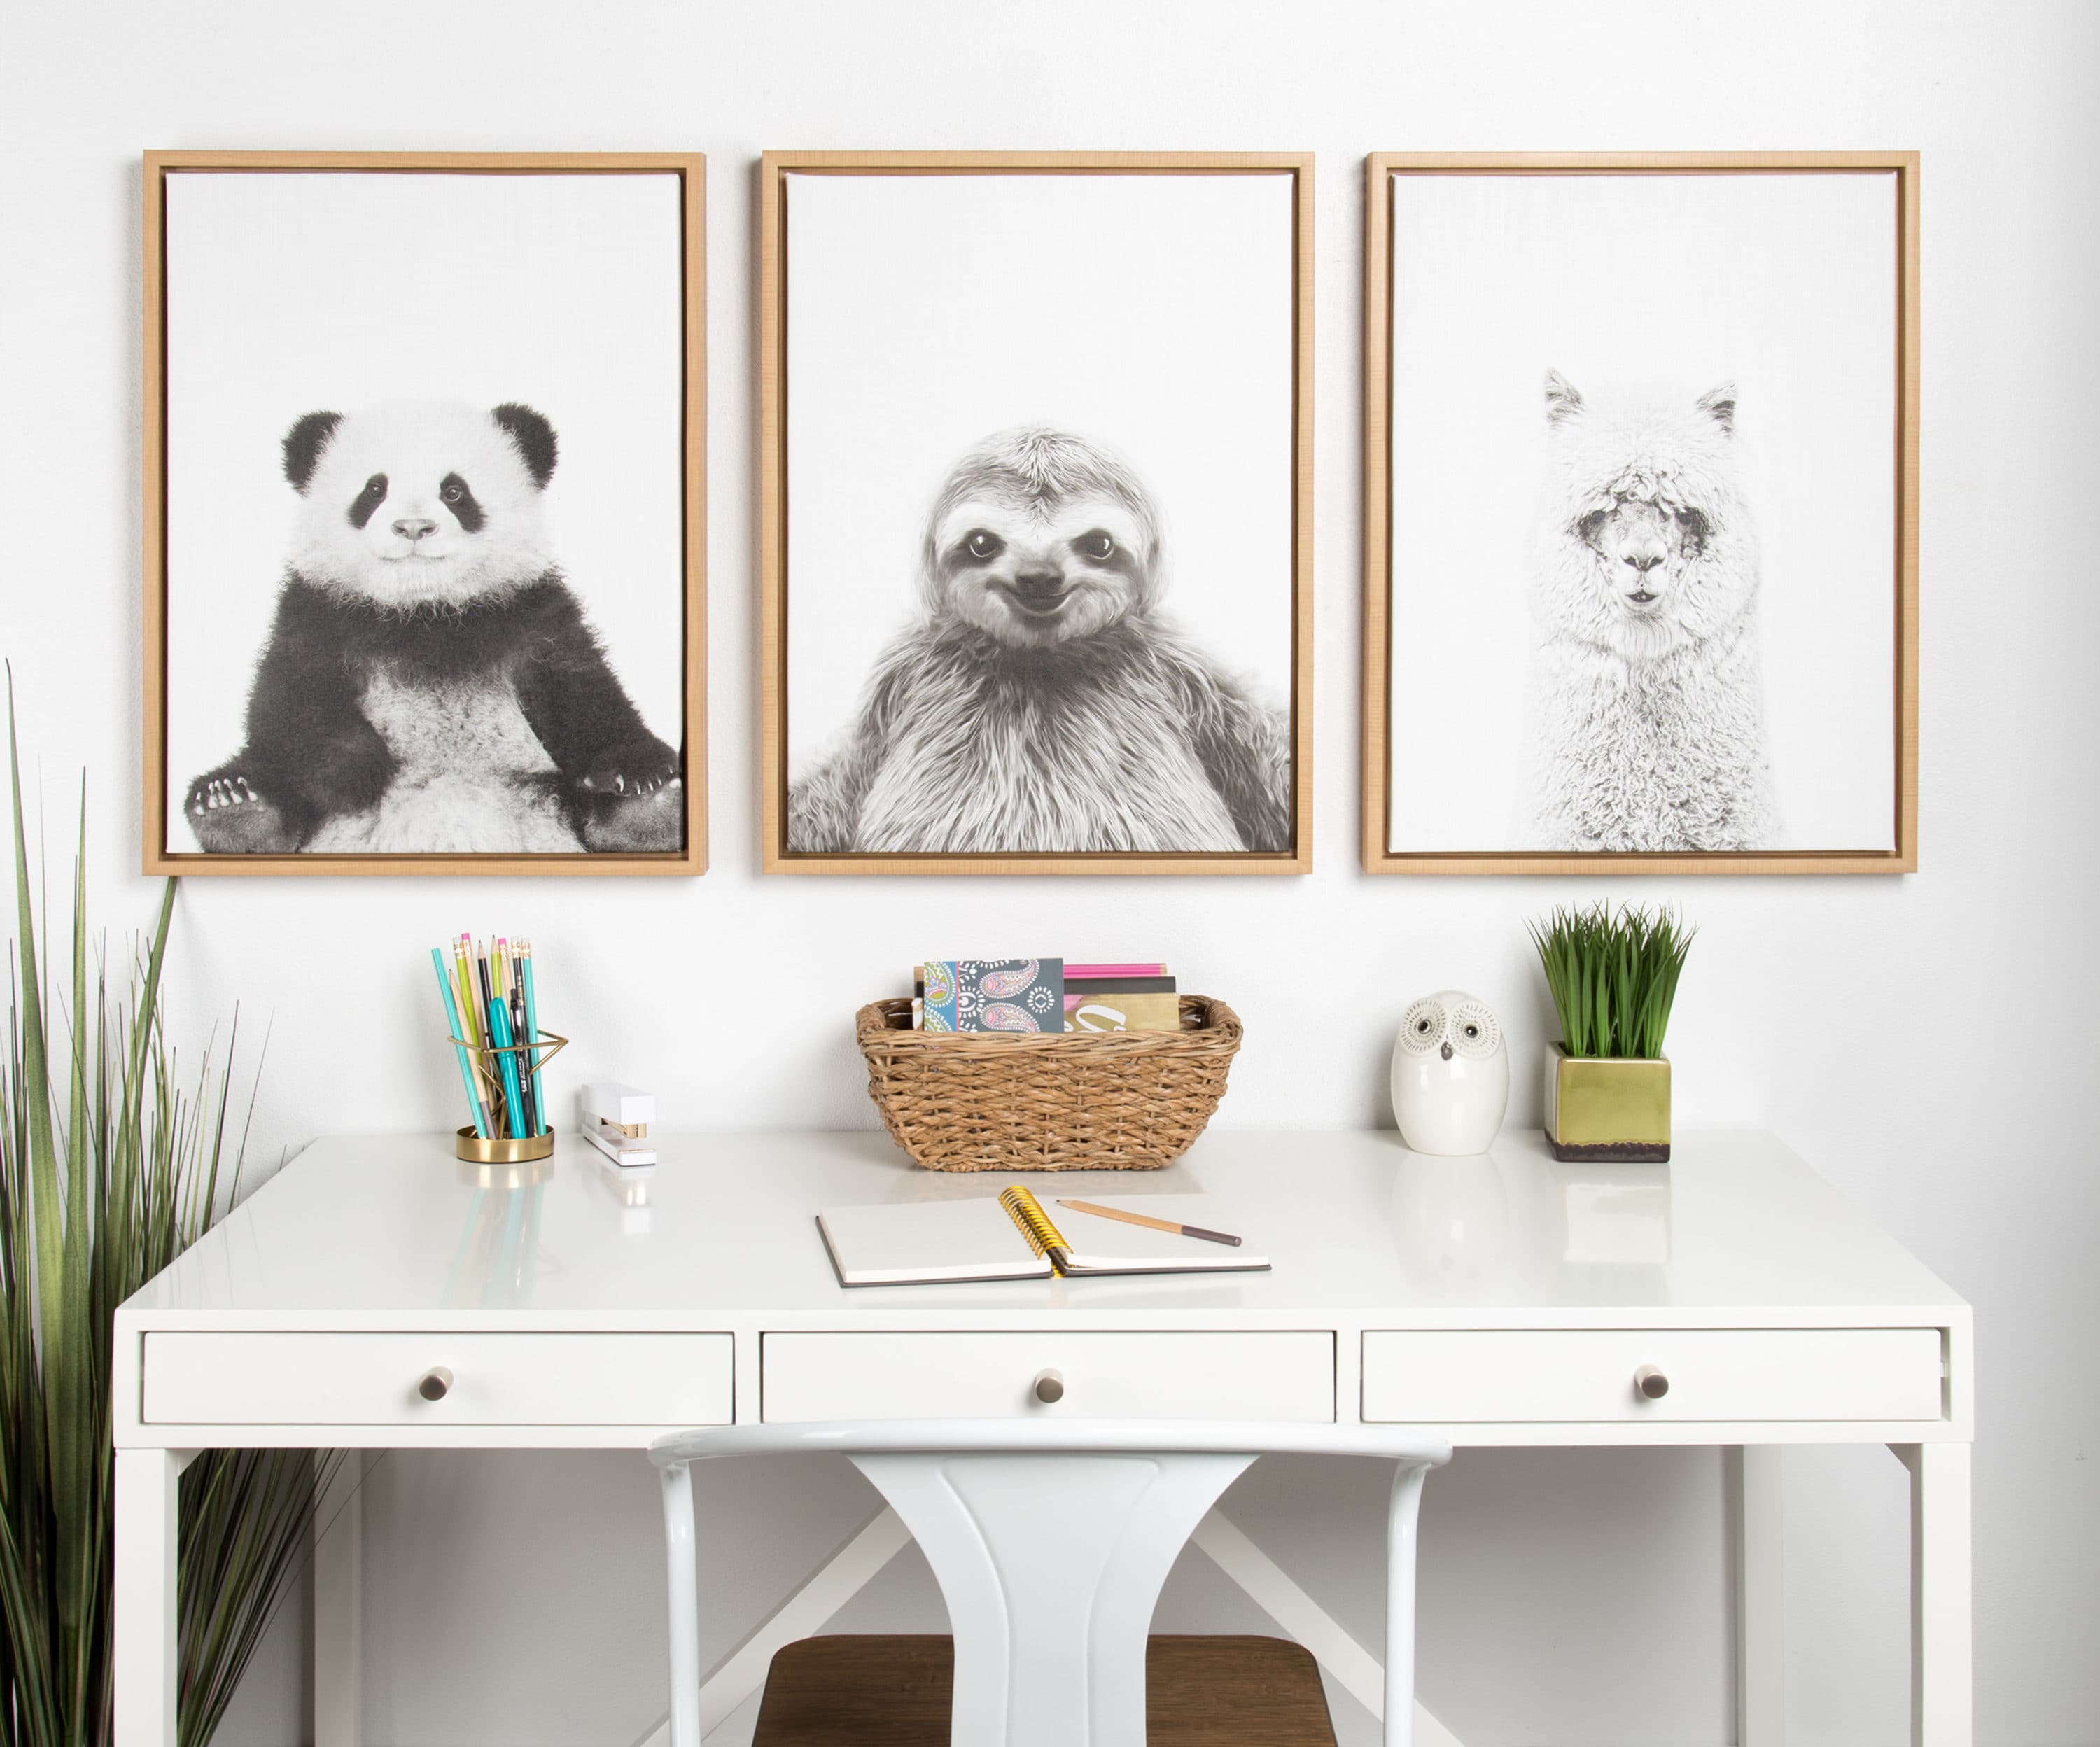 Kate and Laurel Hairy Alpaca Tai Prints Light Brown Framed 24-in H x 18-in  W Animals Print on Canvas in the Wall Art department at